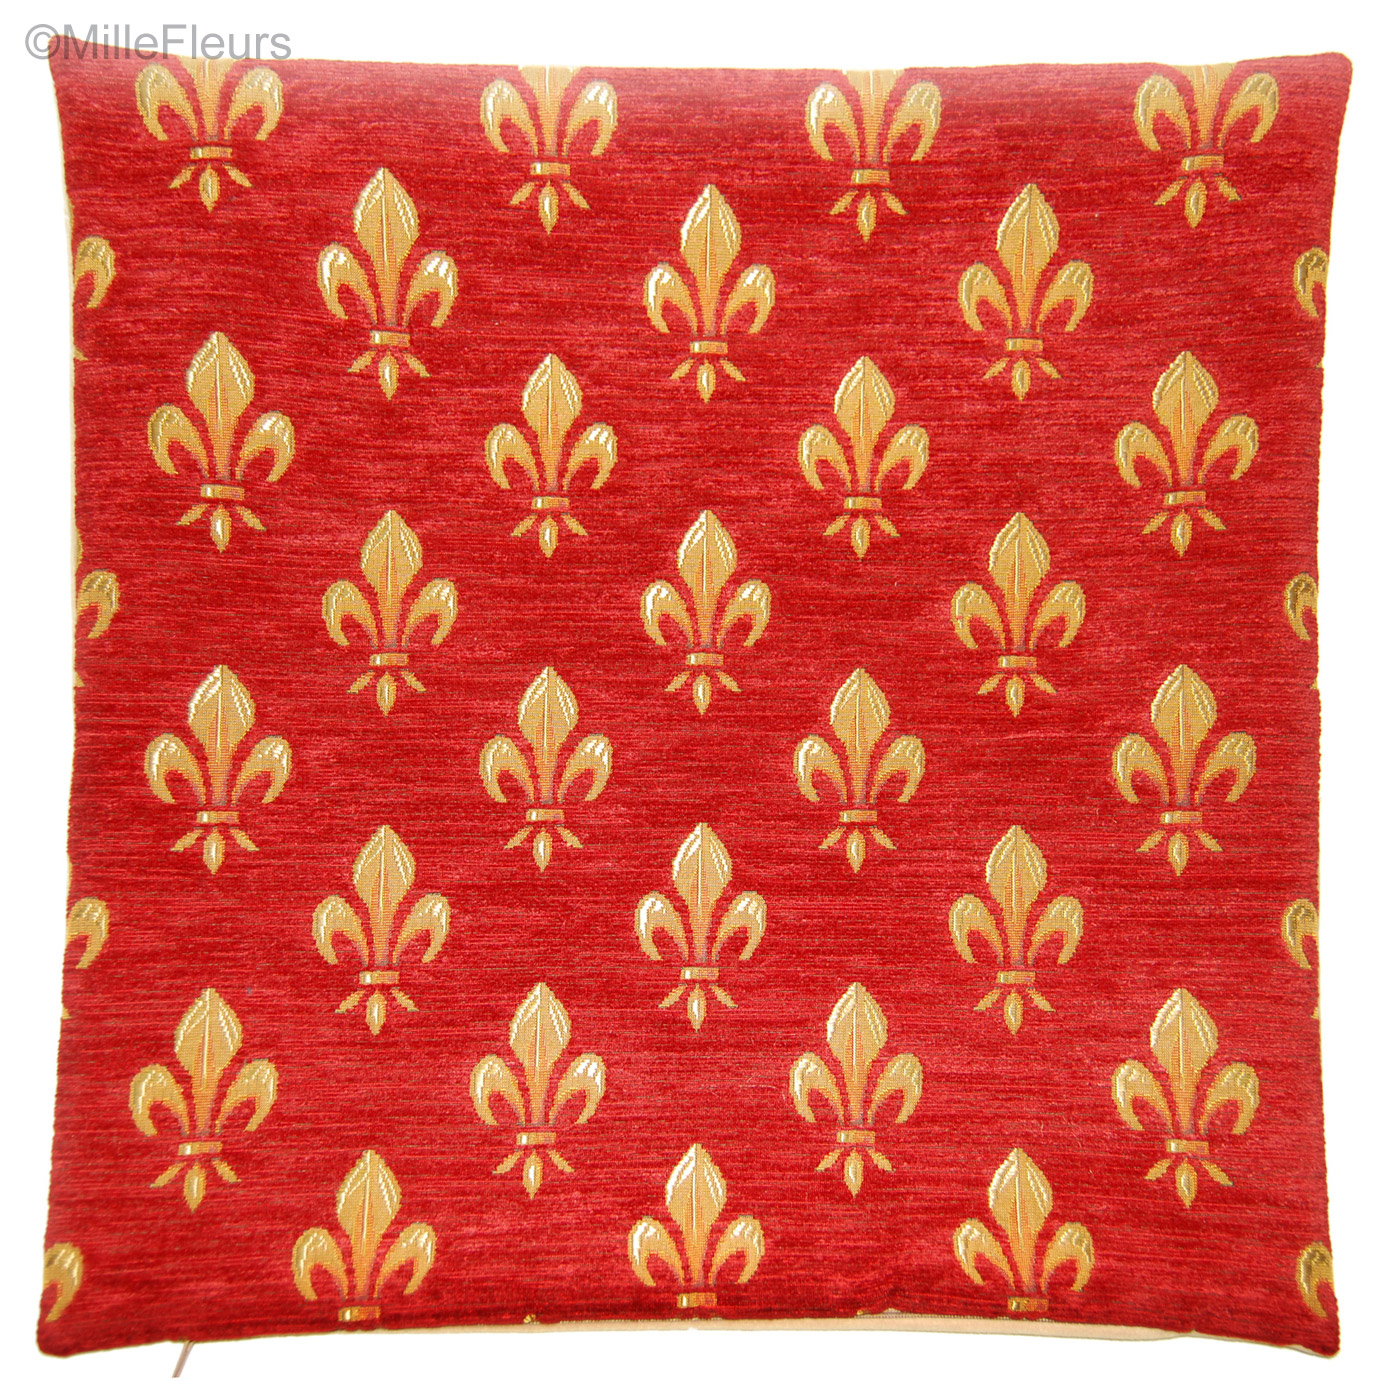 919 HIGH QUALITY 18" BELGIAN TAPESTRY CUSHION COVER RED GOLD 3 FLEUR DE LYS